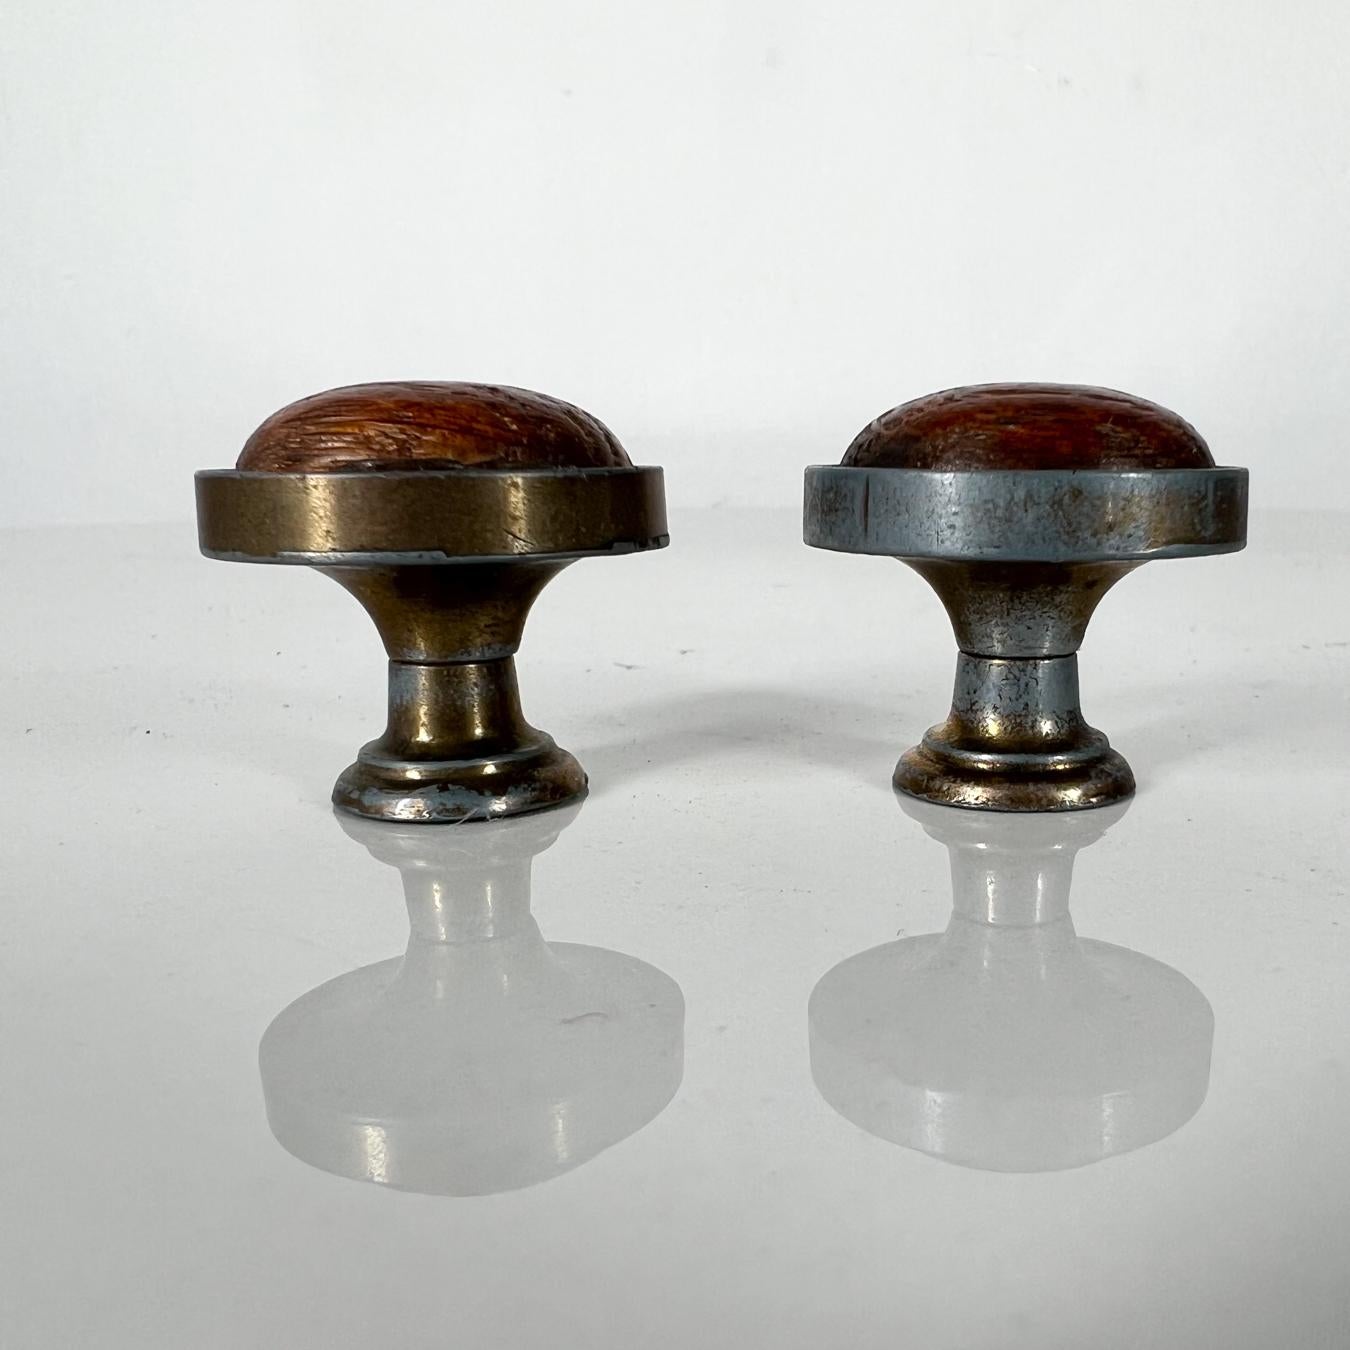 Vintage Hardware Drawer Pulls Brass Knobs with Wood Insert Set of 2 Canada In Good Condition For Sale In Chula Vista, CA